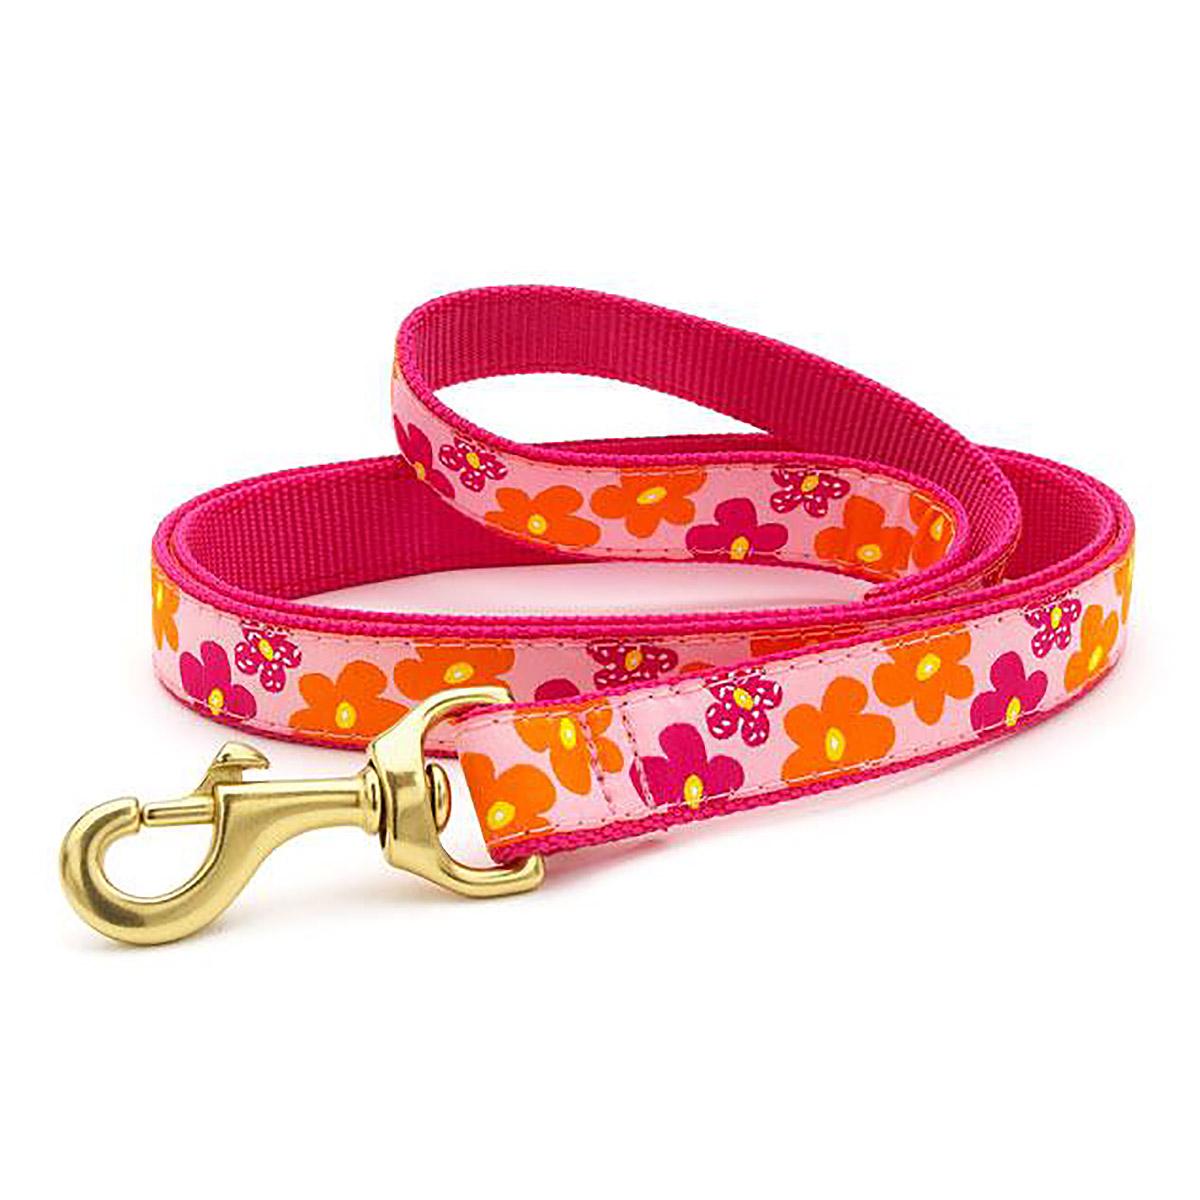 Flower Power Dog Leash by Up Country